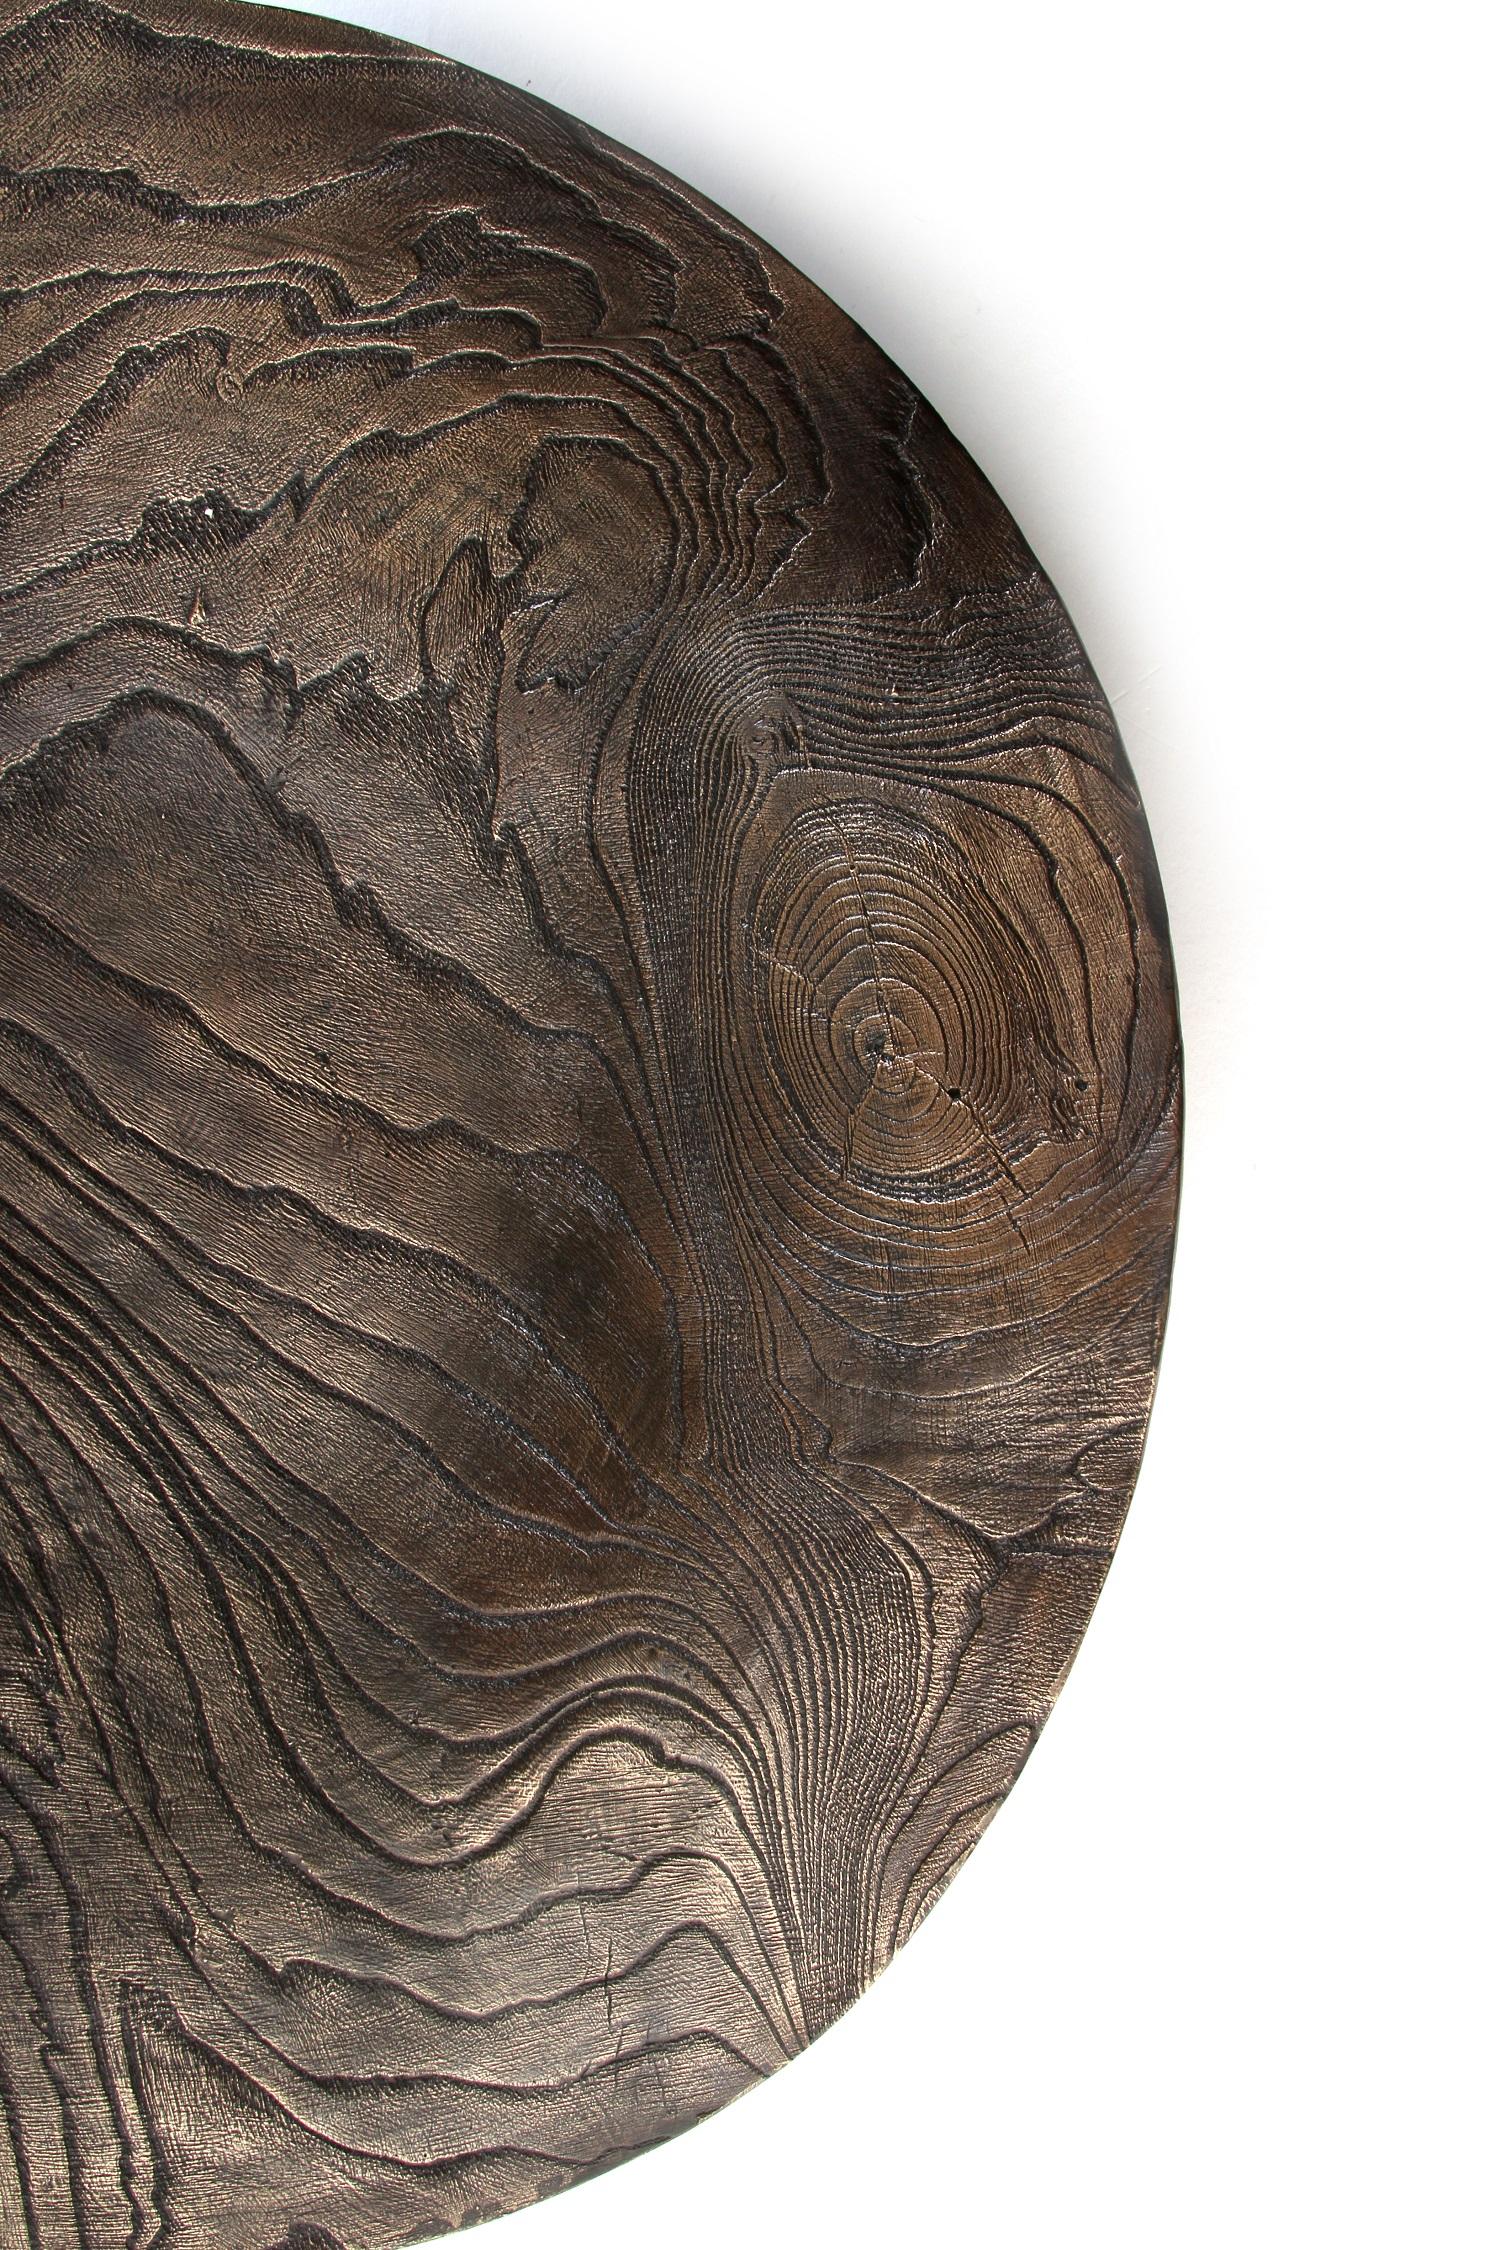 Solid Bronze ‘Willow Platter’ or Dish with Wood Texture and Blackened Patina In New Condition For Sale In West Hollywood, CA